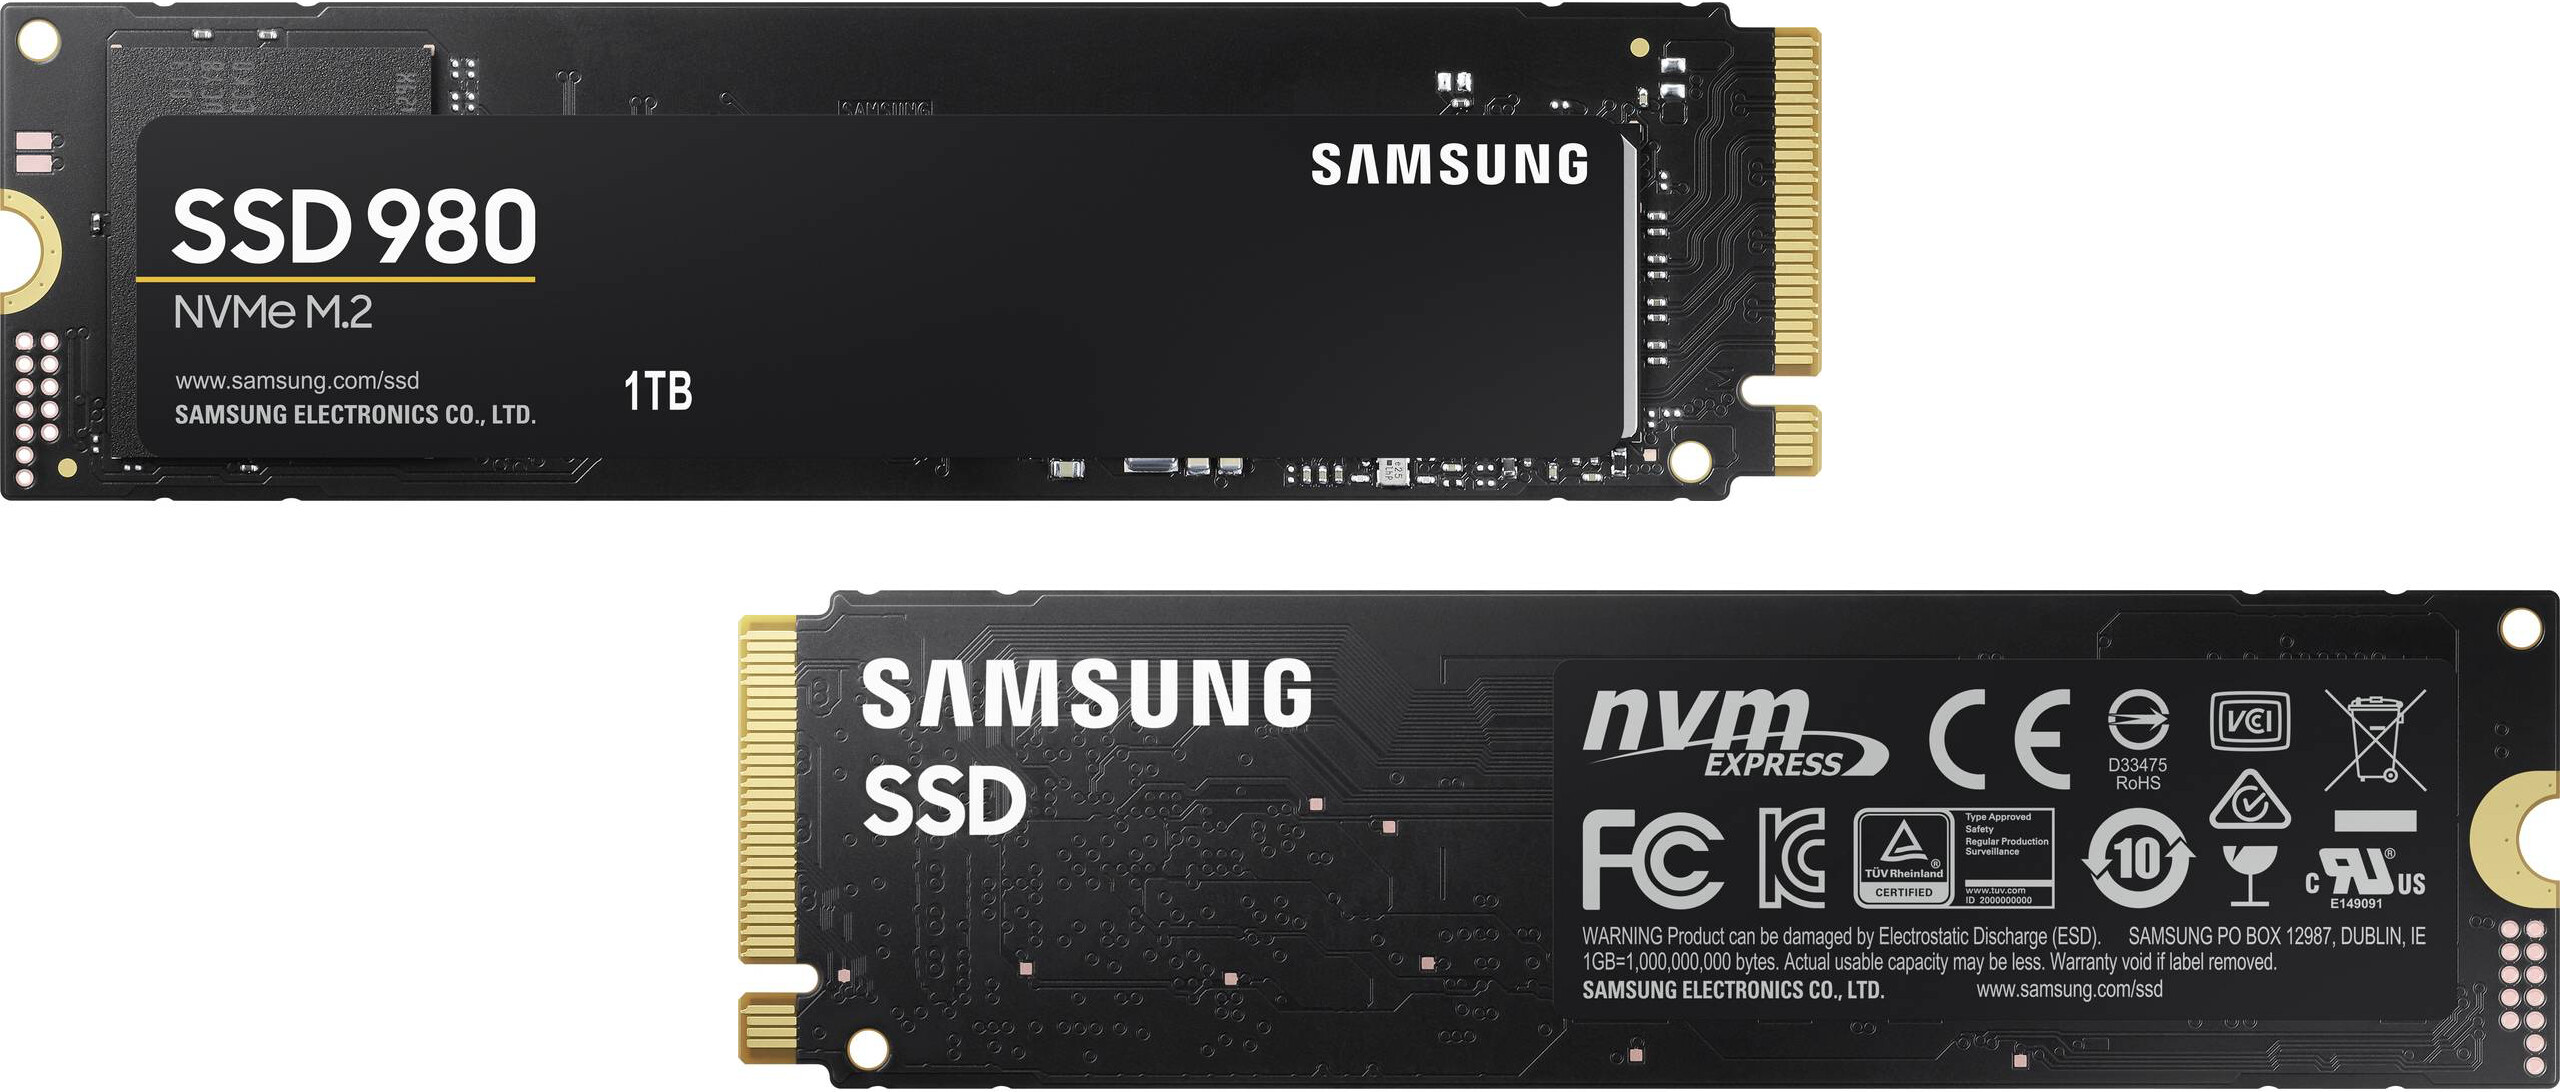 Samsung 980 is a Cost-Effective, DRAM-less PCIe Gen 3.0 M.2 SSD 